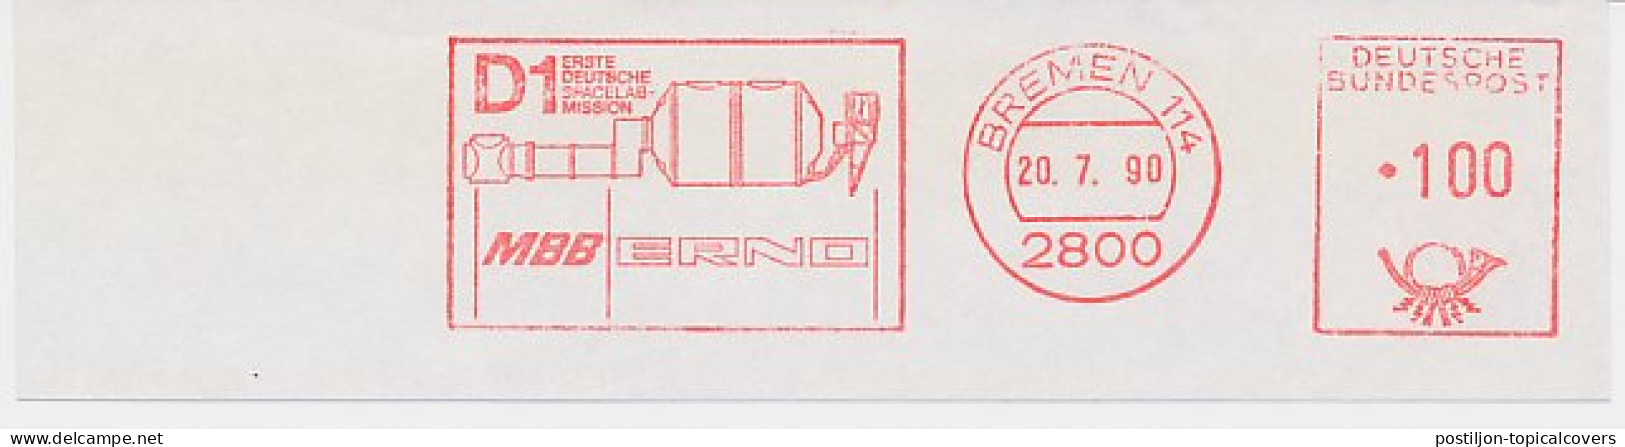 Meter Cut Germany 1990 D1 - First German Spacelab Mission - Astronomie